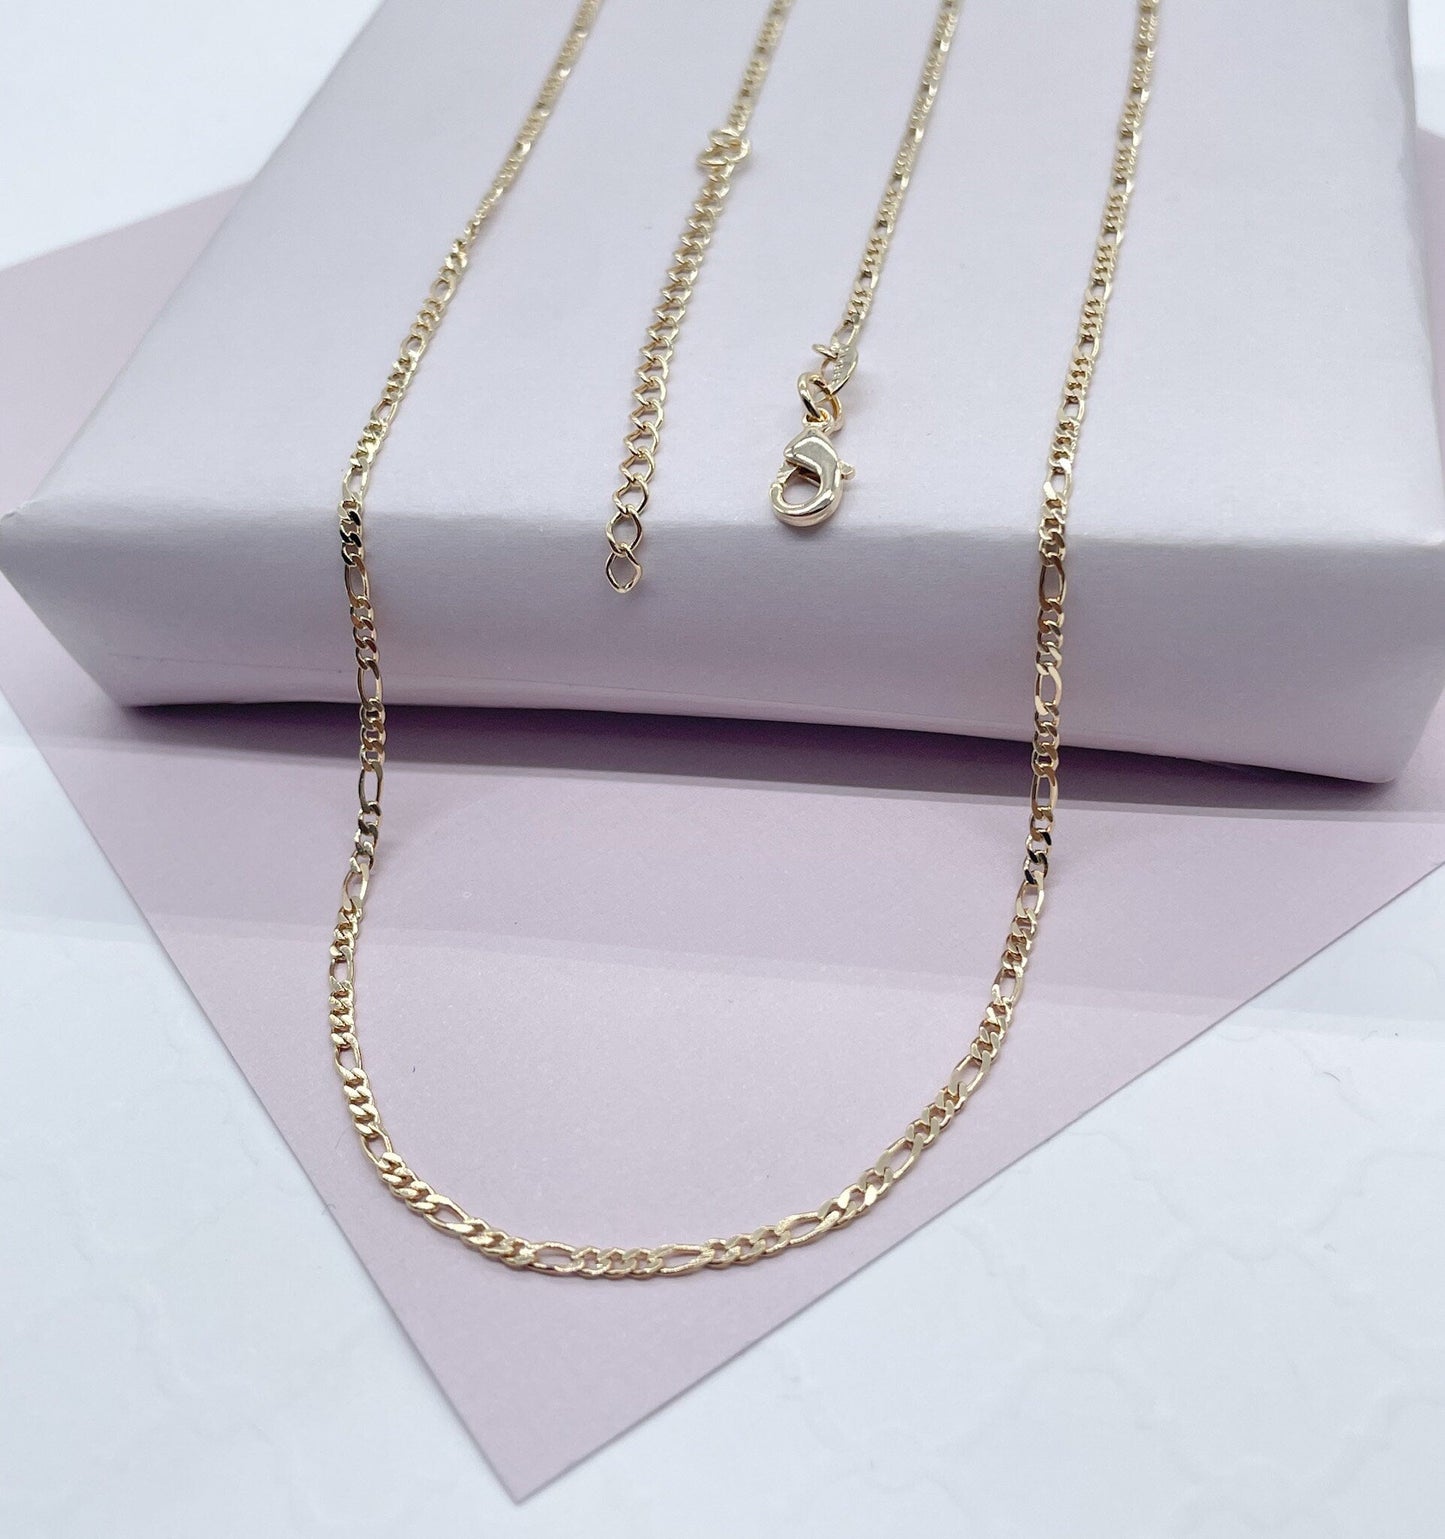 18k Gold Layered 2mm Figaro 3X1 Chain Necklace for Wholesale Jewelry Making